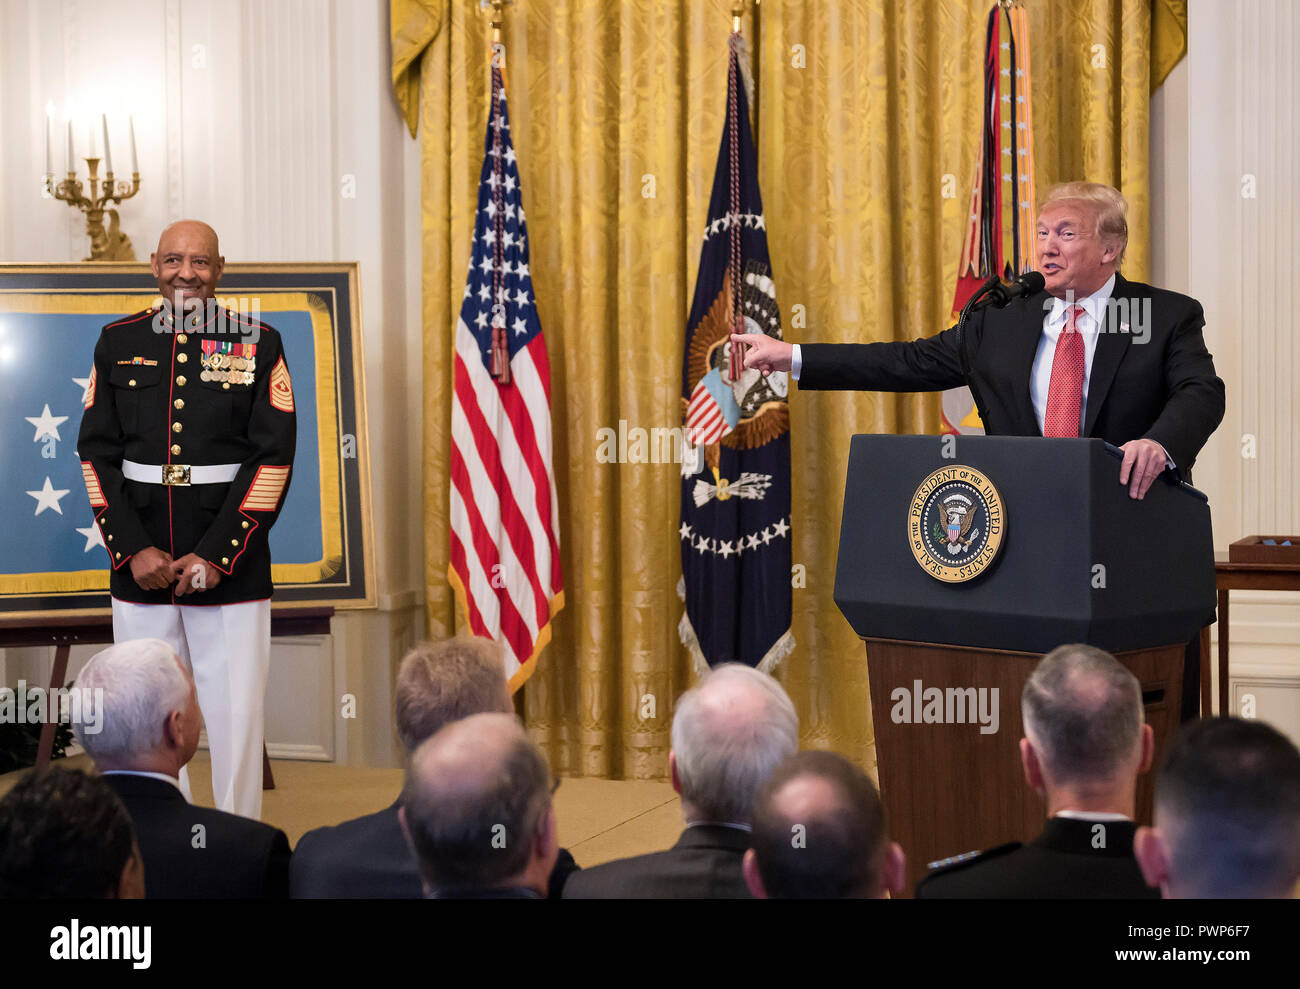 Washington, USA. 17th Oct 2018. Credit: Chip Somodevilla/Pool via CNPUnited States President Donald J. Trump awards the Medal of Honor to Sergeant Major John L. Canley, United States Marine Corps (Retired), for conspicuous gallantry during the Vietnam War in a ceremony in the East Room of the the White House in Washington, DC on Wednesday, October 17, 2018. Credit: Ron Sachs/CNP/MediaPunch Credit: MediaPunch Inc/Alamy Live News Stock Photo